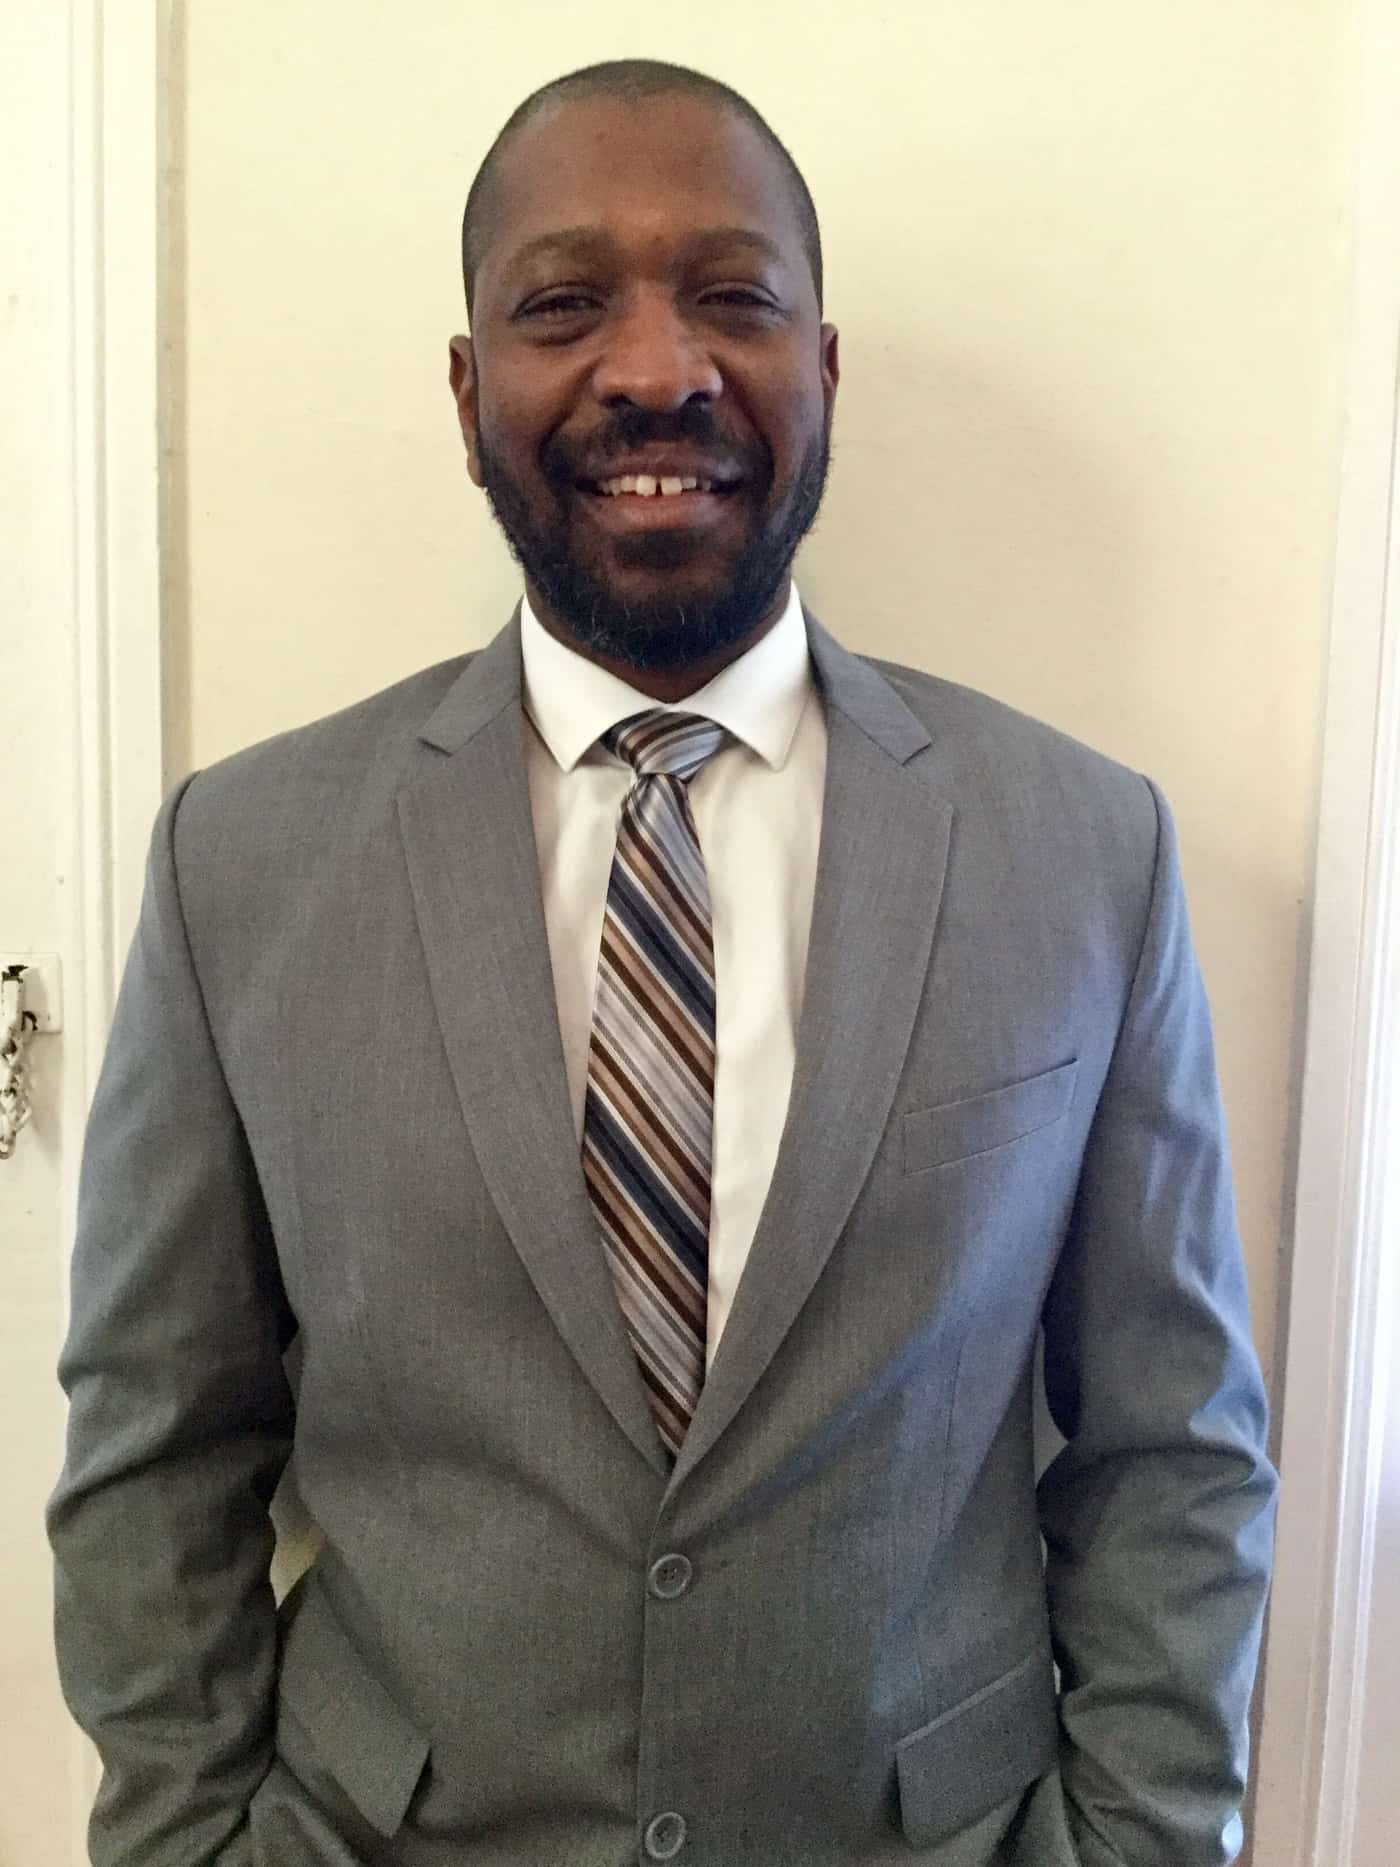 Image of Ronny Roundtree, Jr. standing against a wall and dressed in a gray suit.